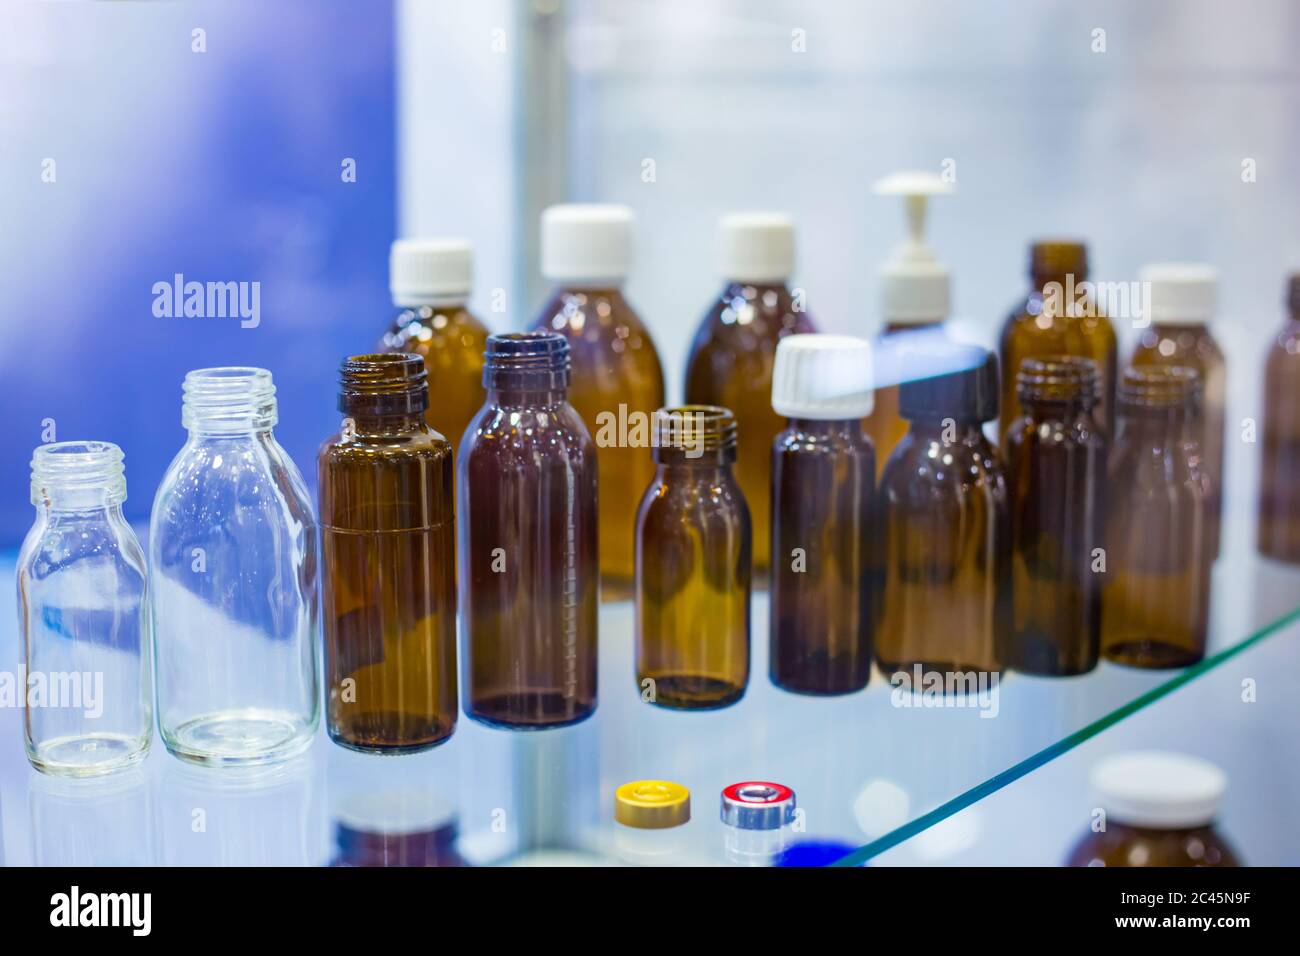 Pharma industry, science, medicine, experiment and healthcare concept. Medical empty glass bottles in showcase at pharmaceutical exhibition, pharmacy Stock Photo